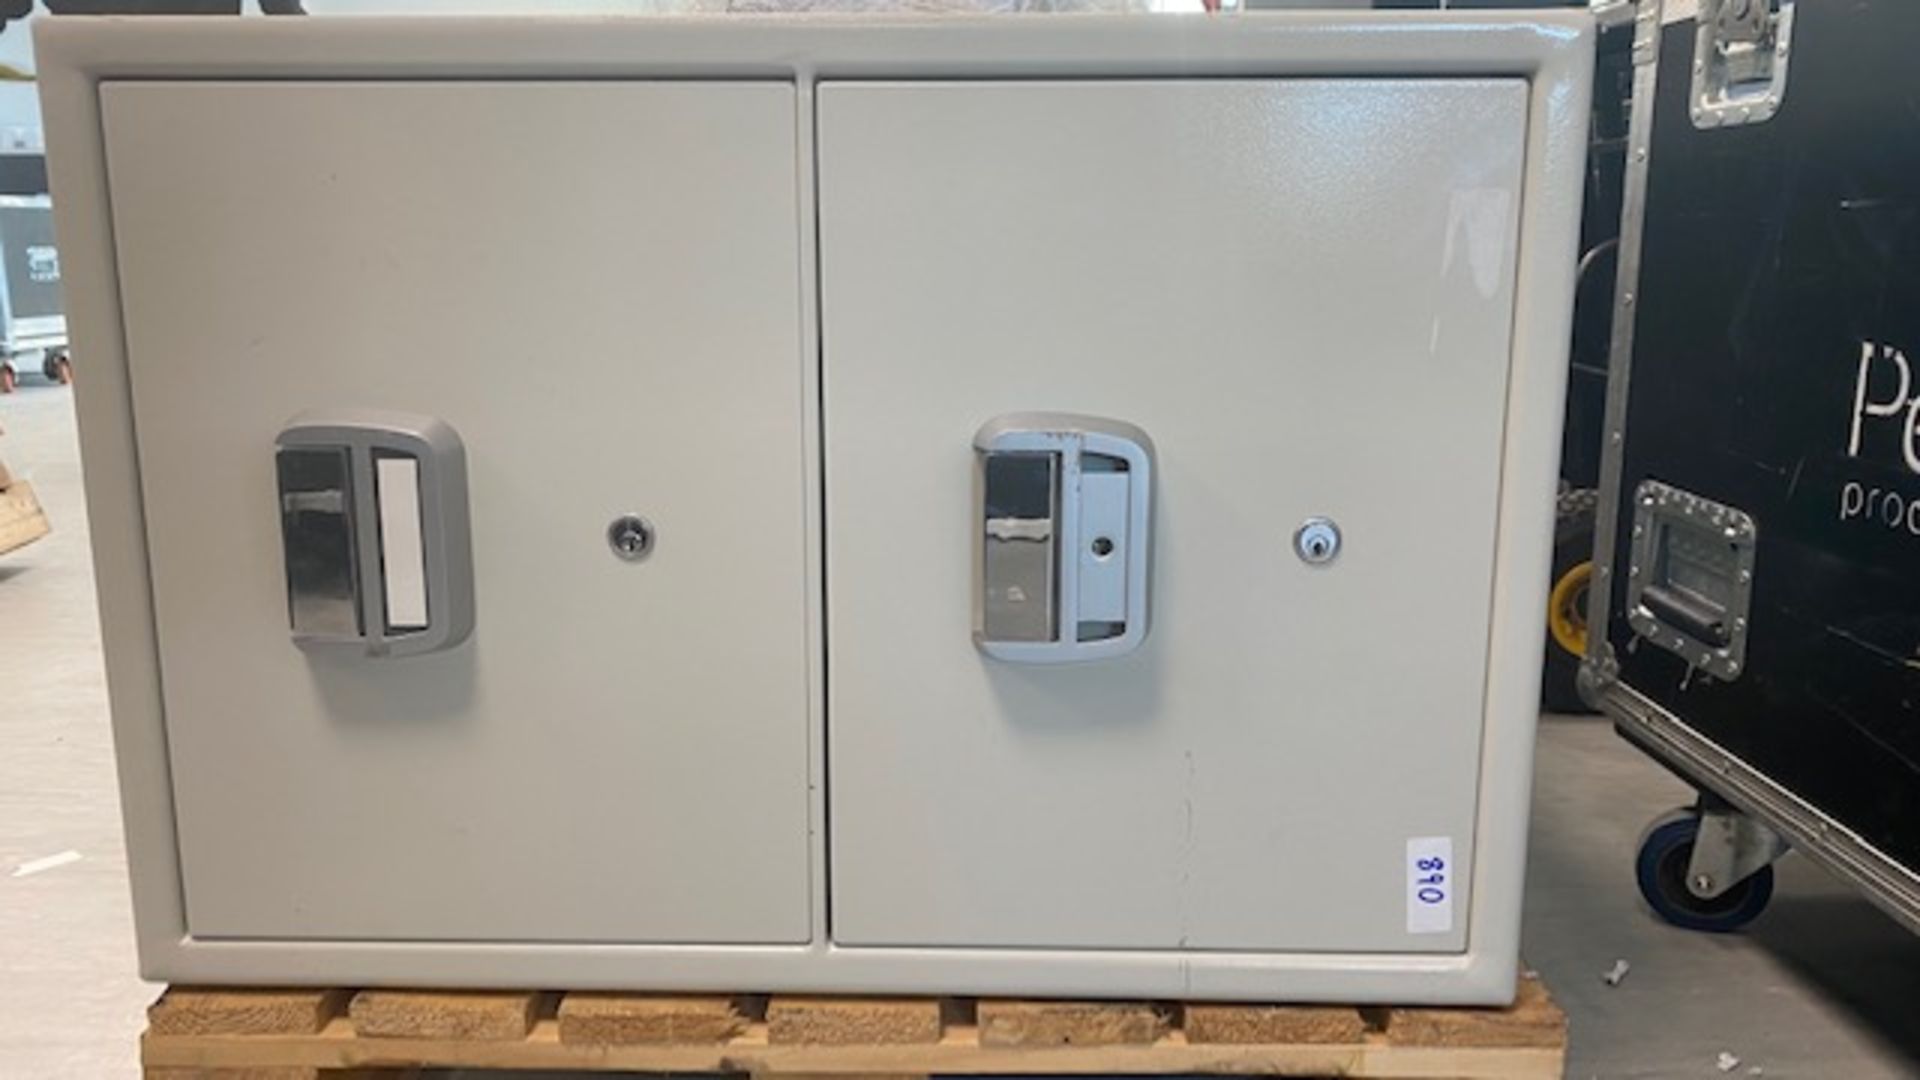 1 x White Safe With 2 lockable Drawers H 780mm x D 680mm W 530mm - Ref: 890 - CL581 - Location: